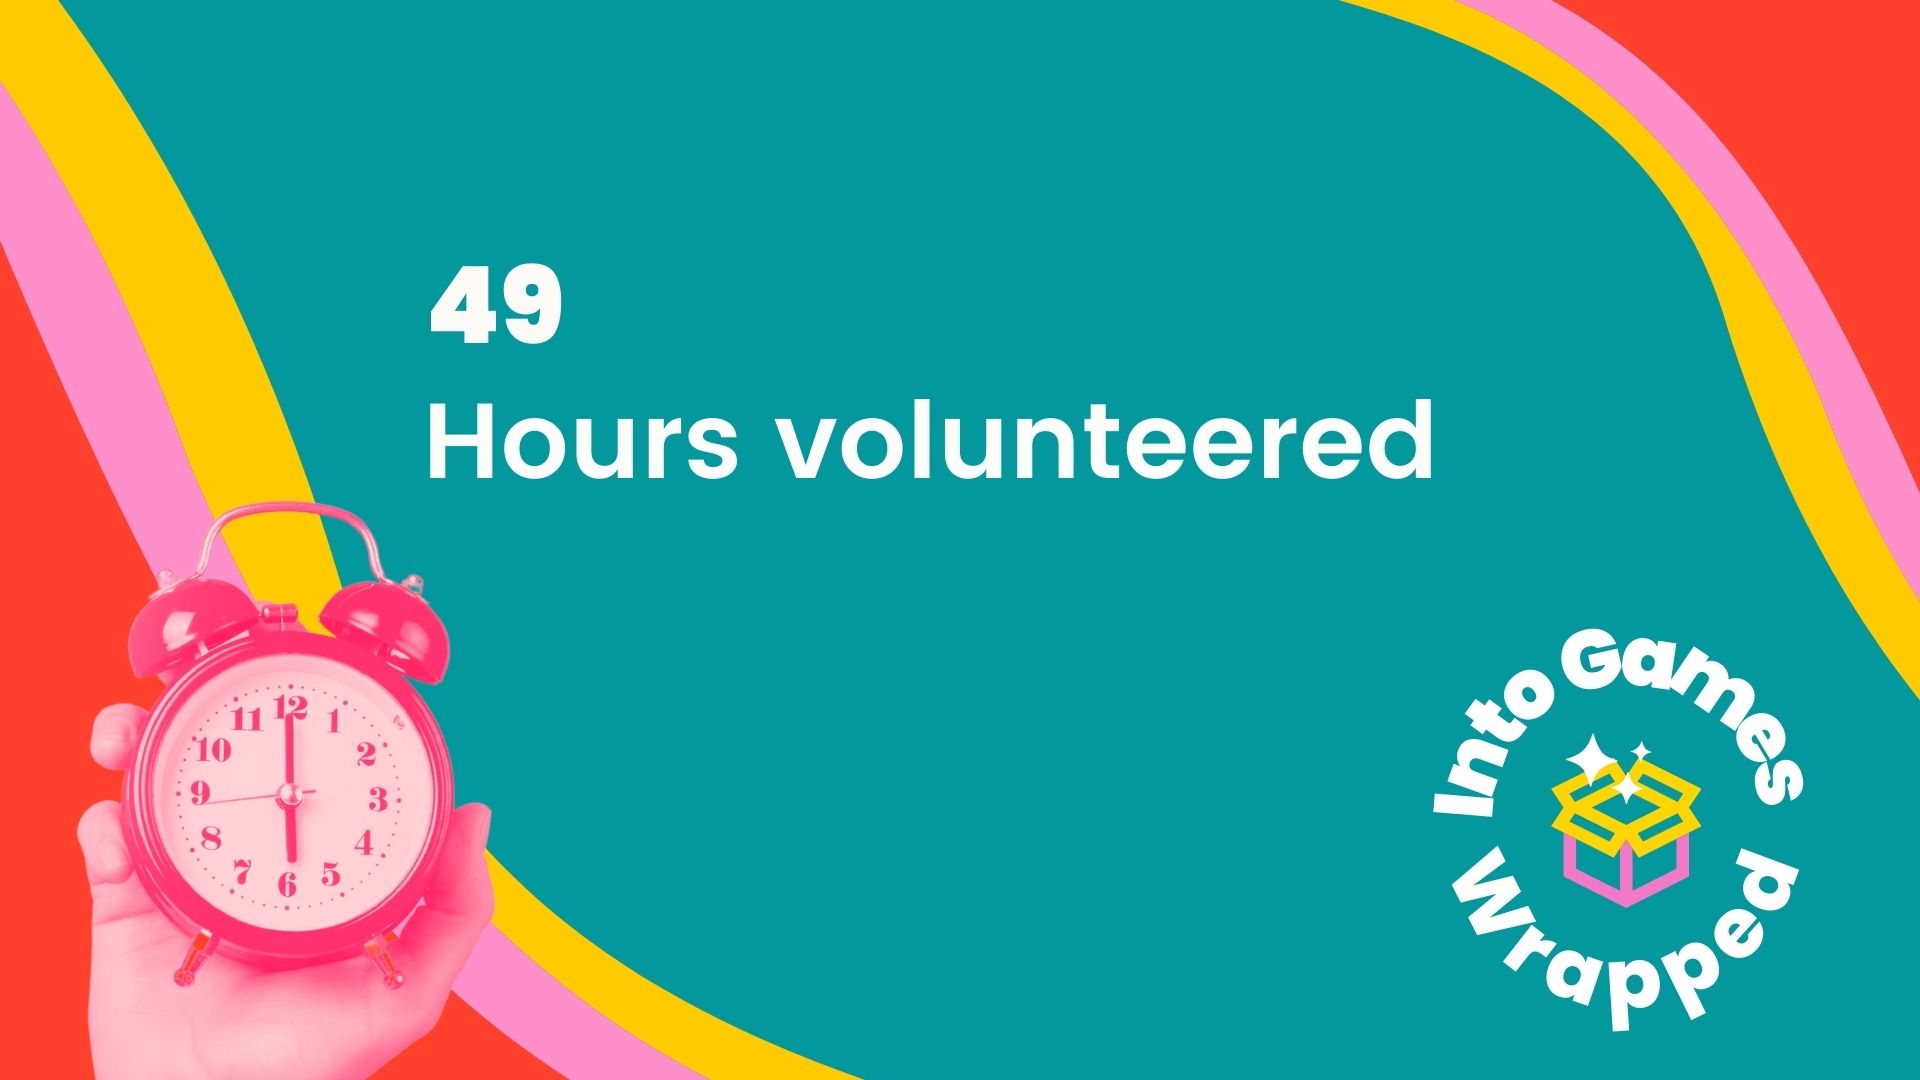 49 hours volunteered by electric square members